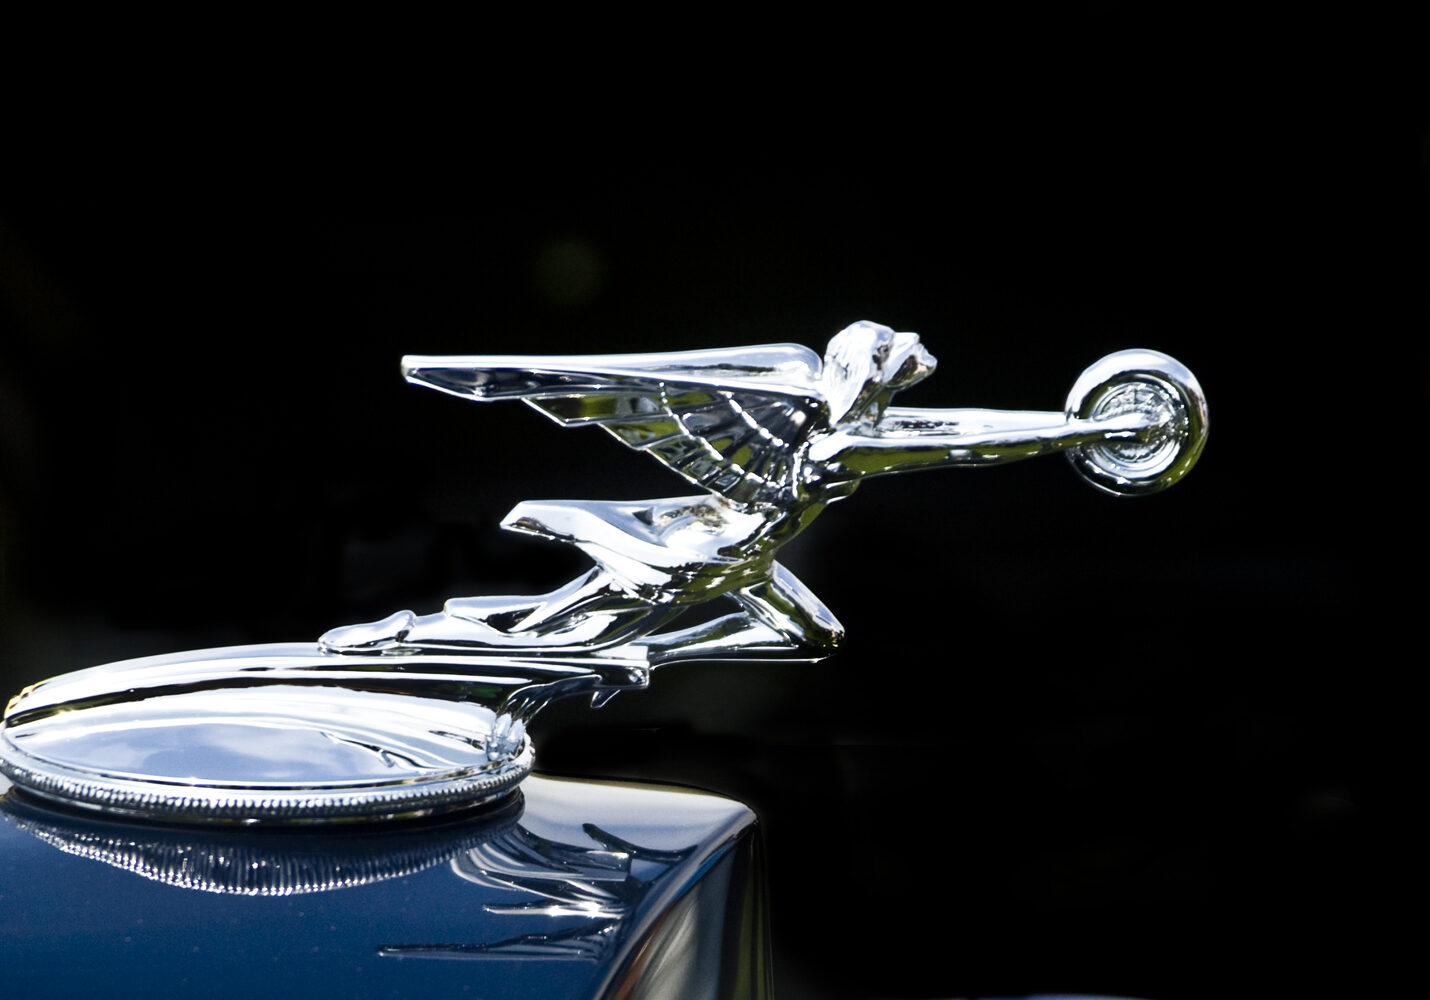 A close up of the hood ornament on an antique car.